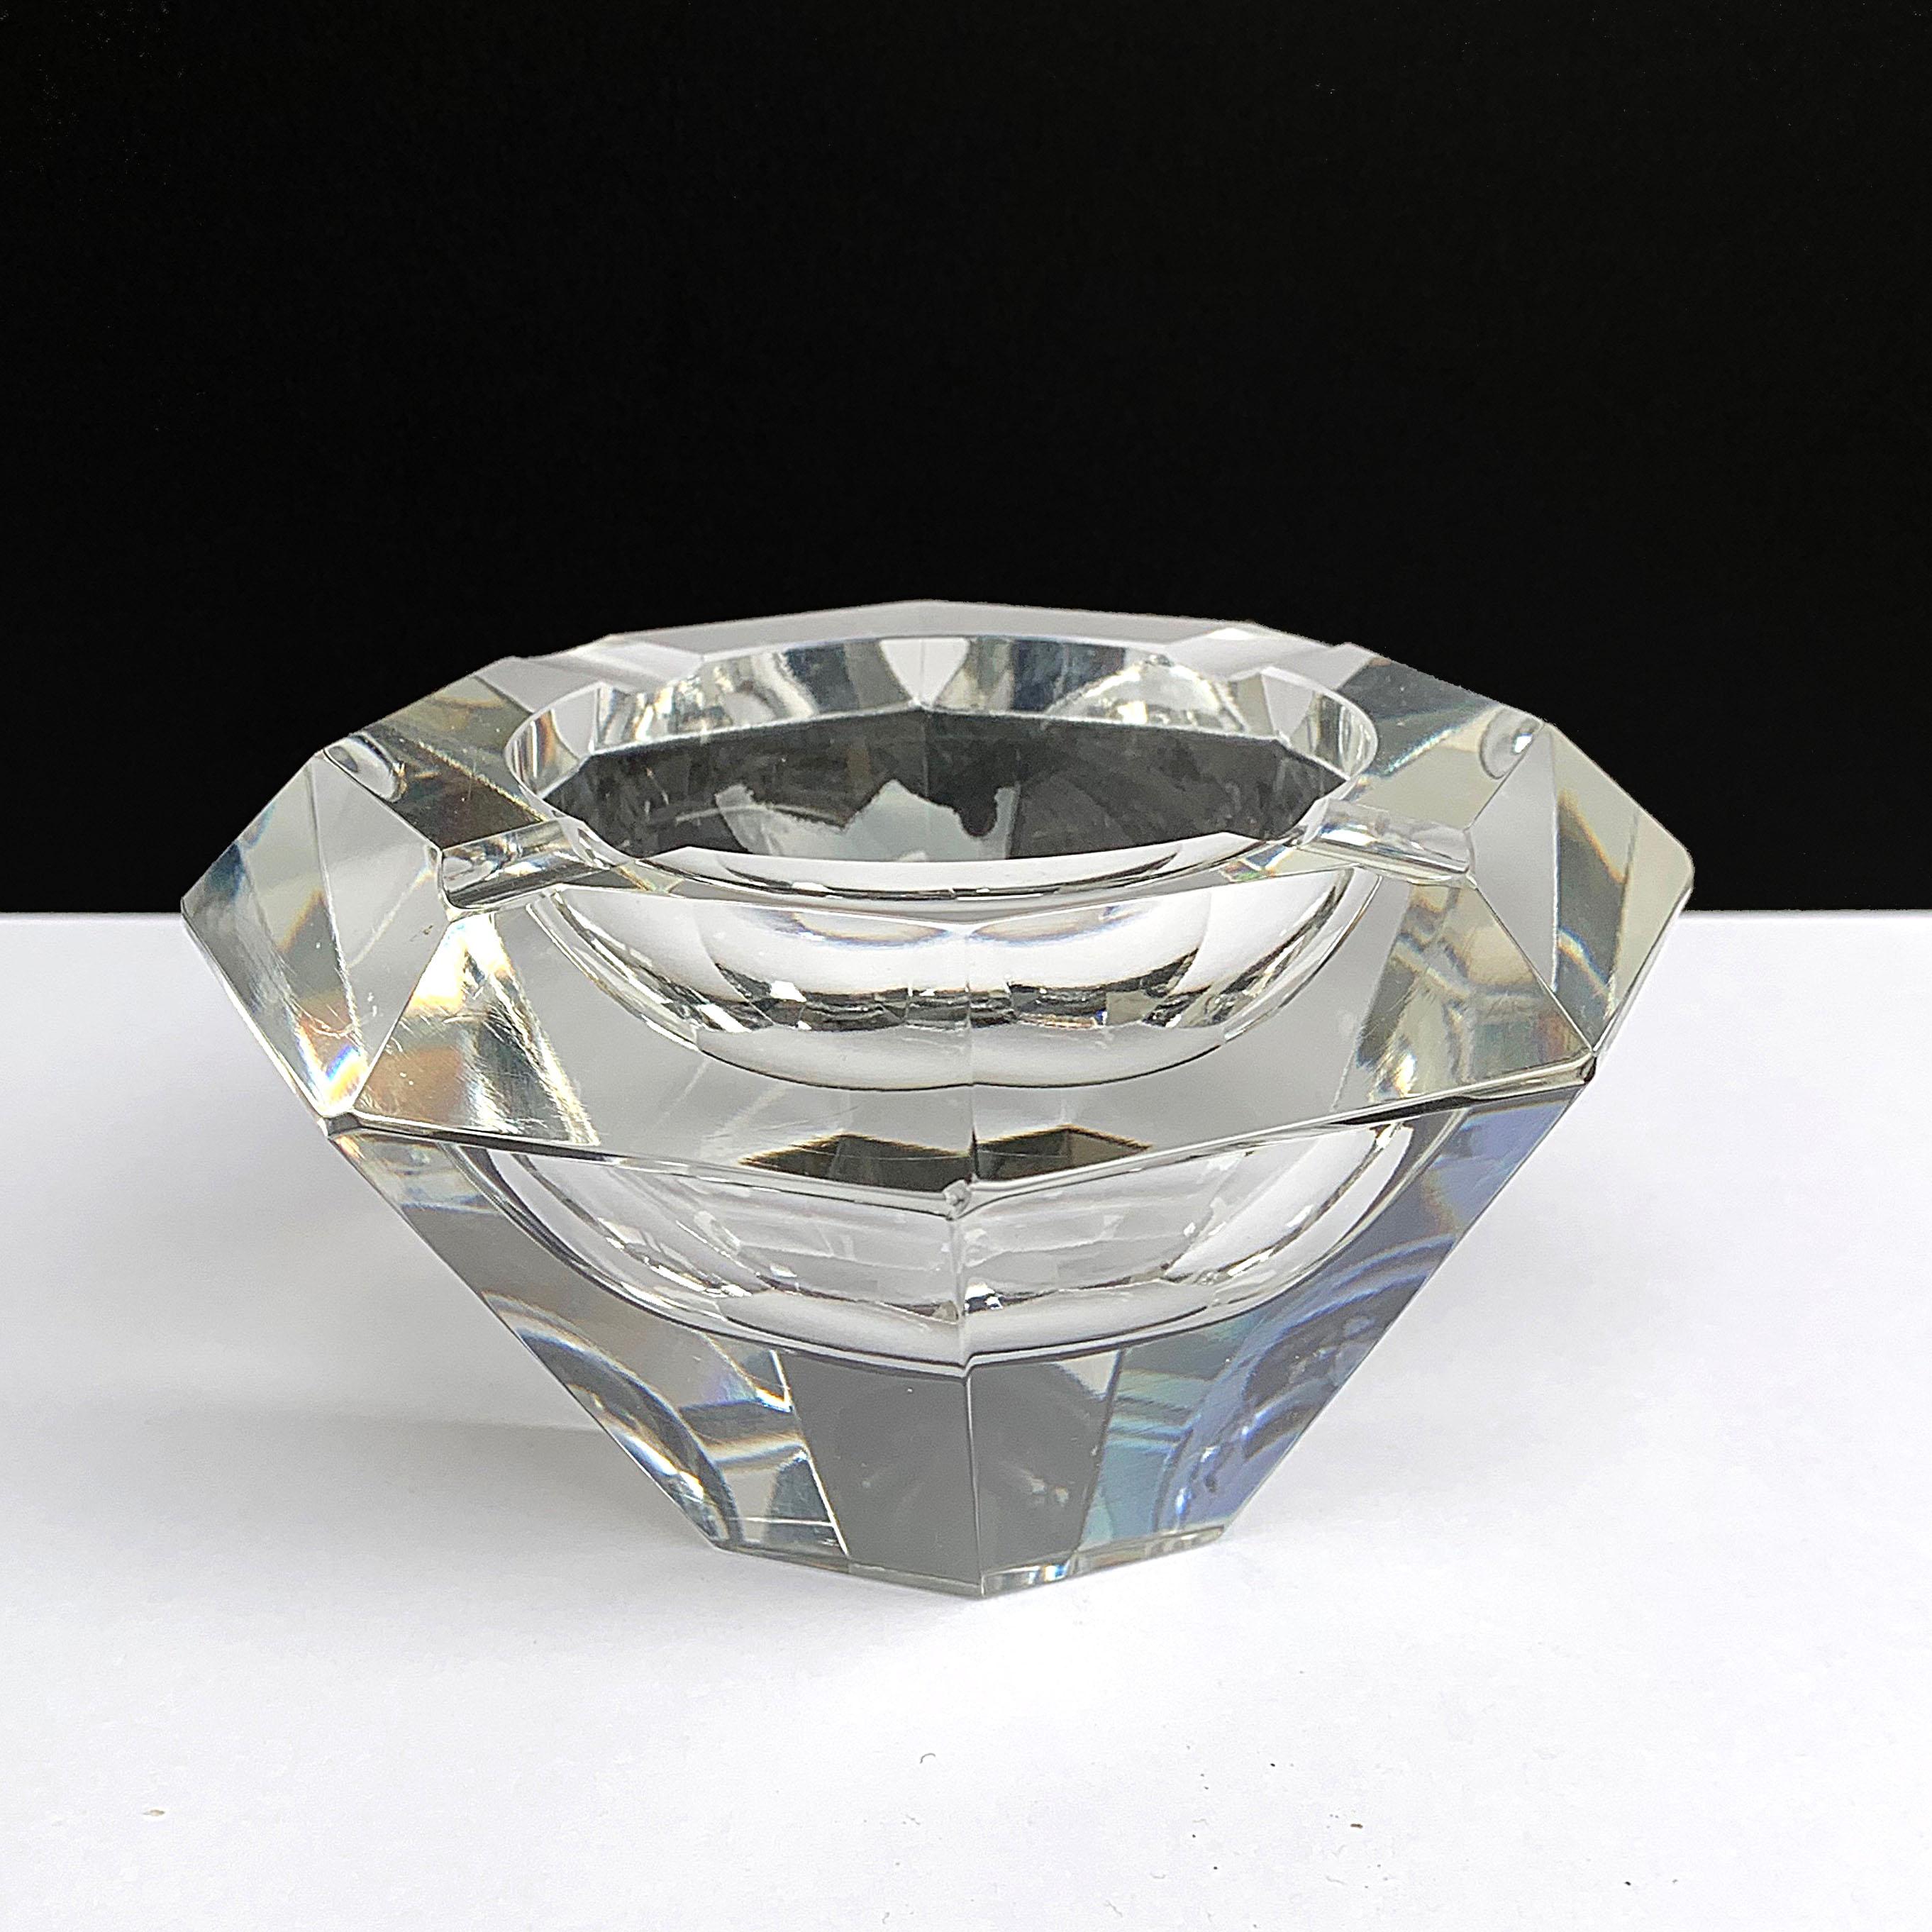 Giant Flavio Poli Bowl in Faceted Murano Glass in the Shape of a Diamond, Italy For Sale 2